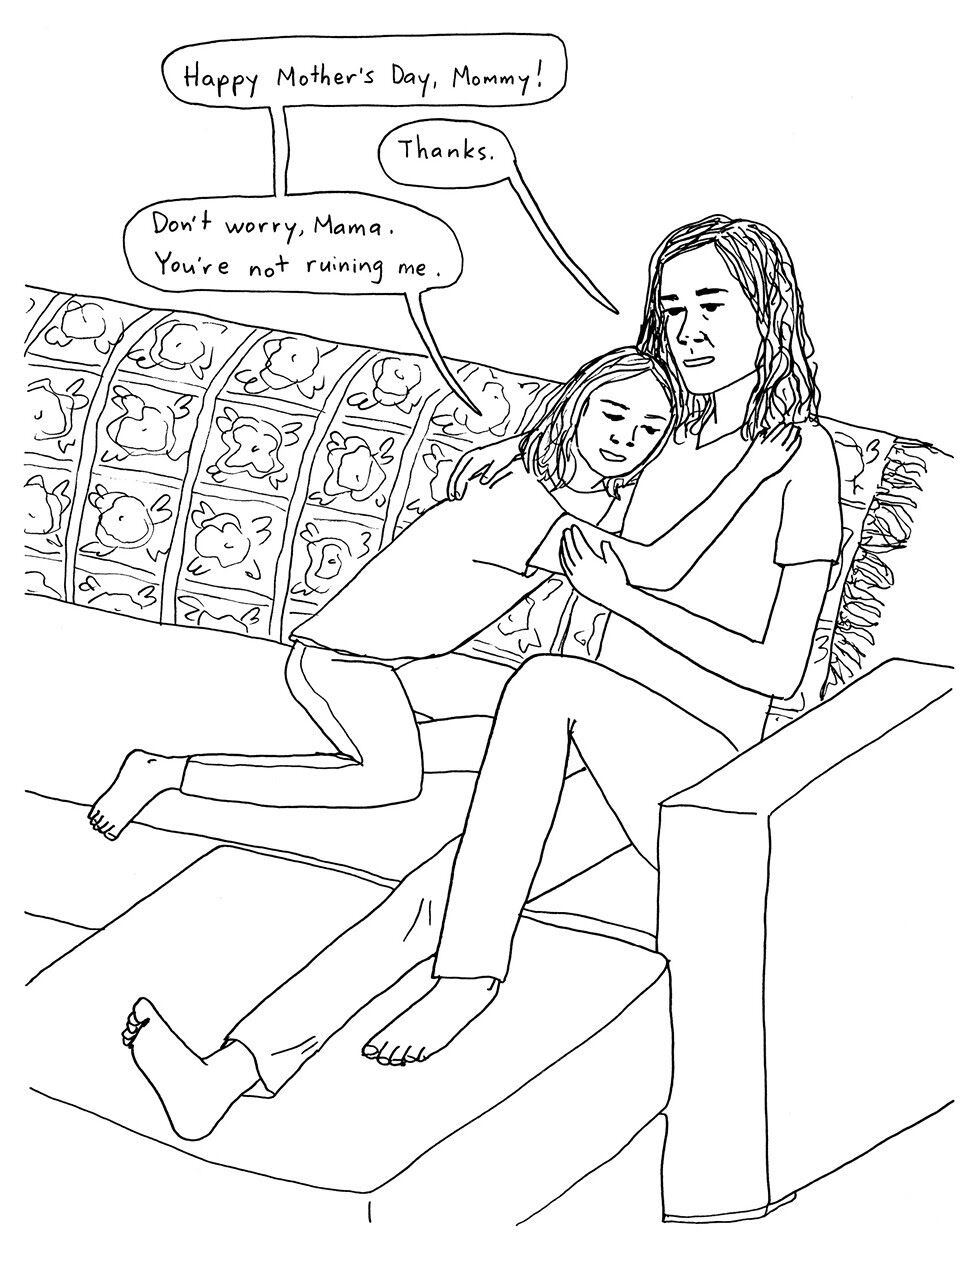 A black and white illustration of a mother and a child on the couch 